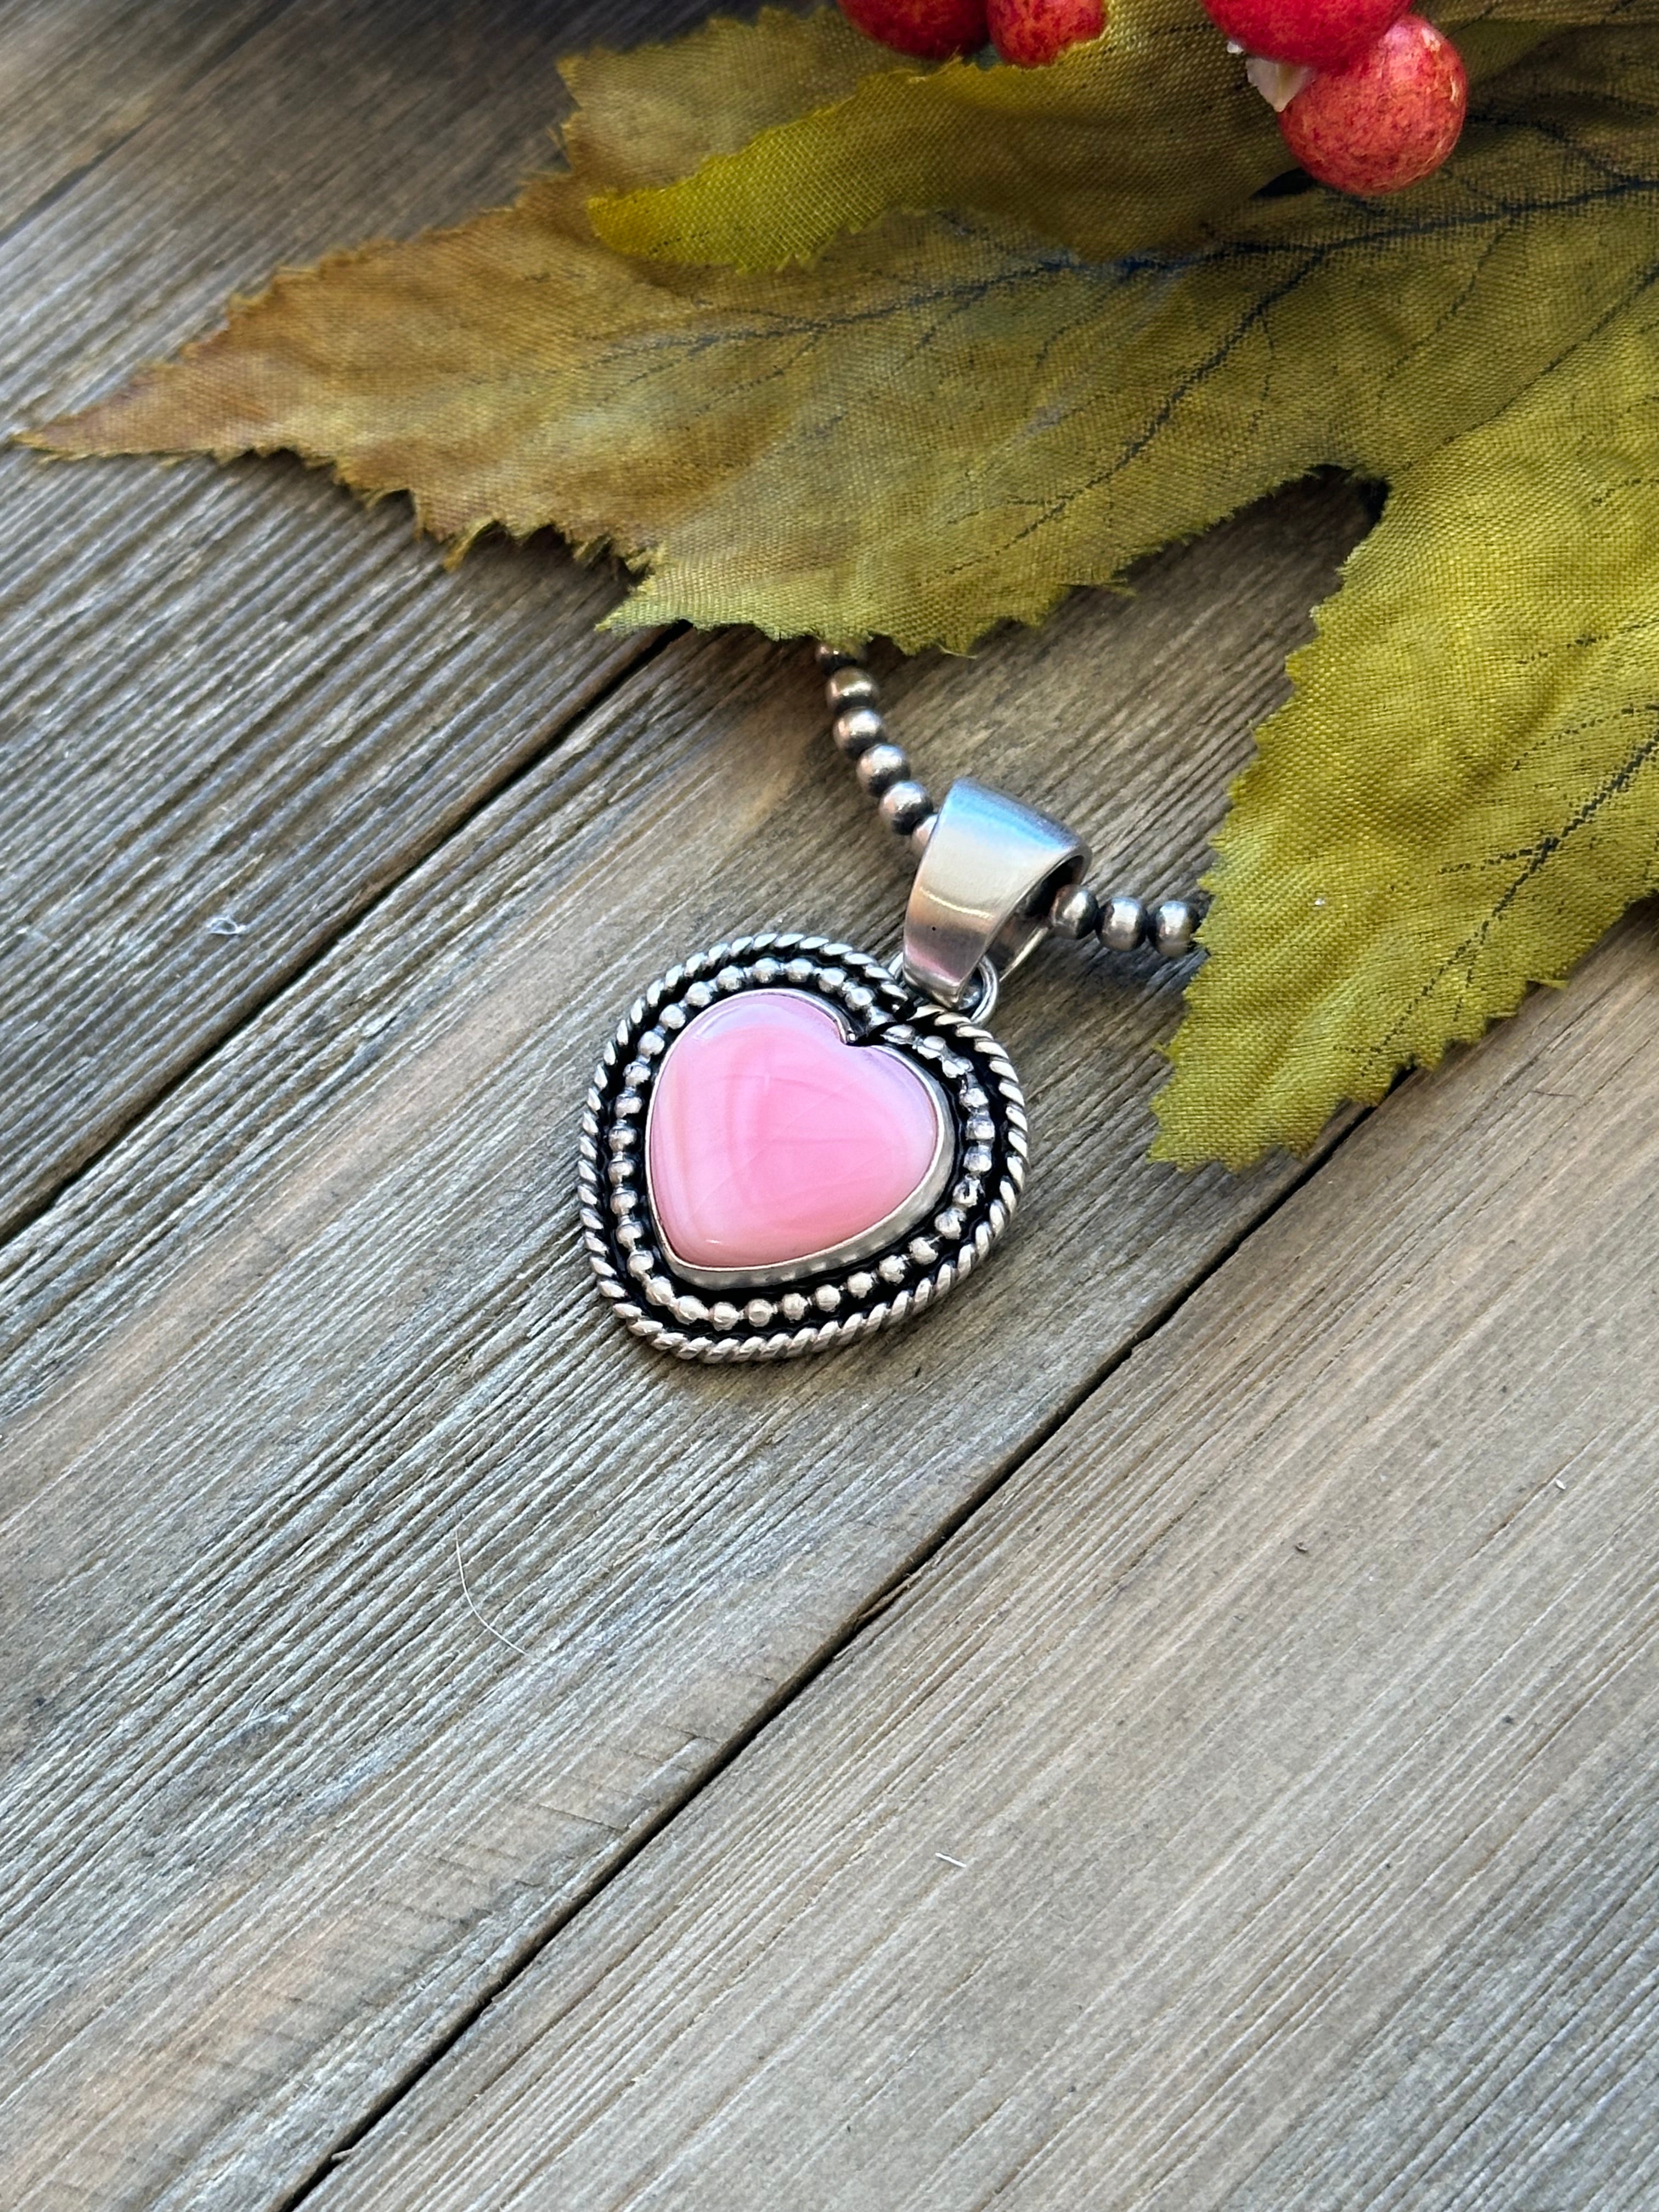 Navajo Made Pink Conch & Sterling Silver Heart Pendant